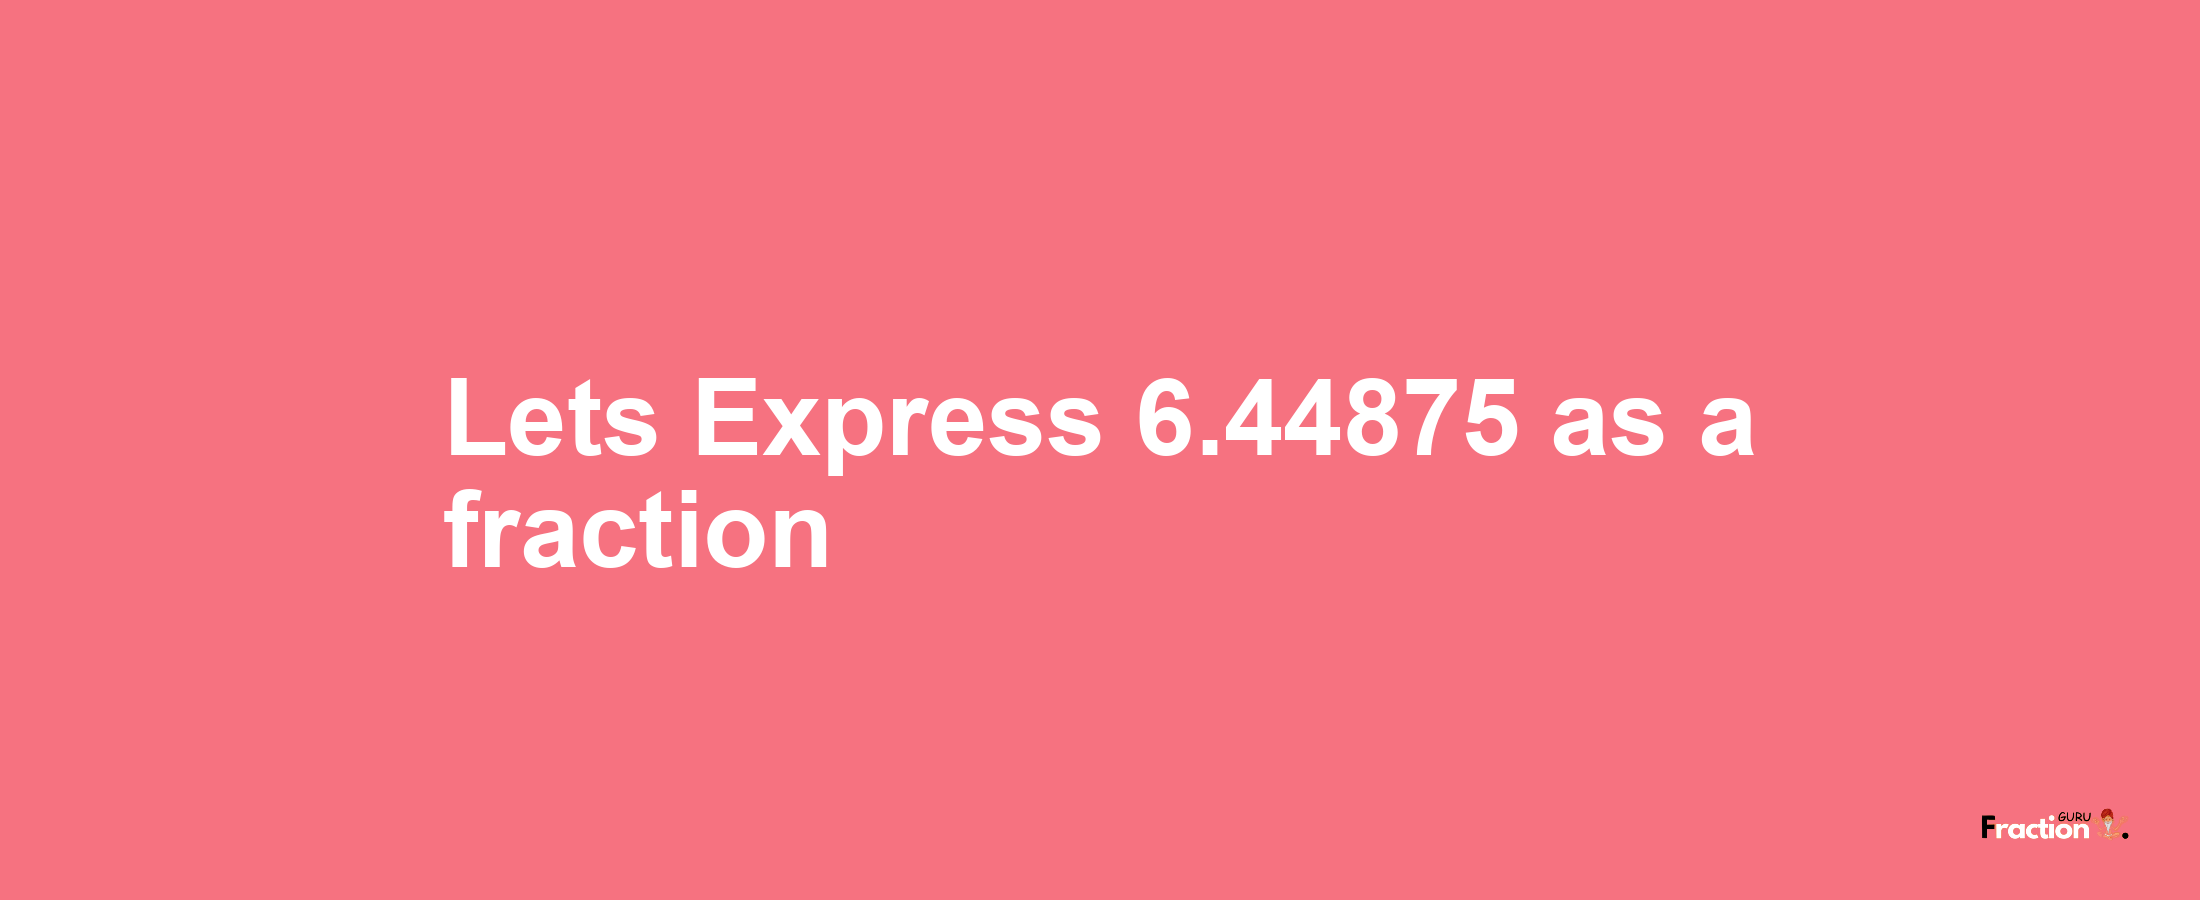 Lets Express 6.44875 as afraction